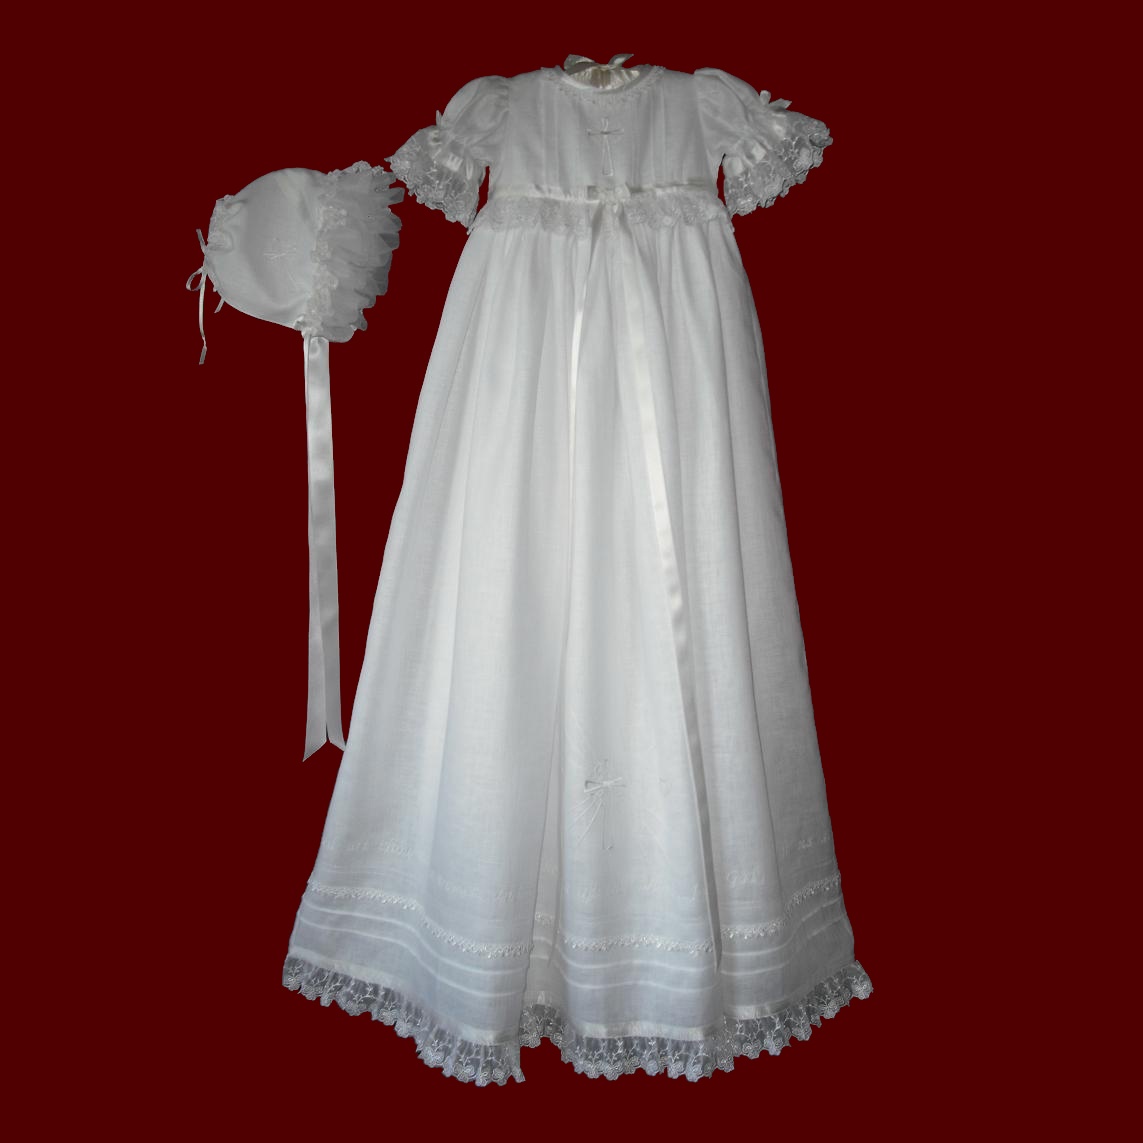 Irish Linen Girls Hail Mary Christening Gown With Shamrock Lace